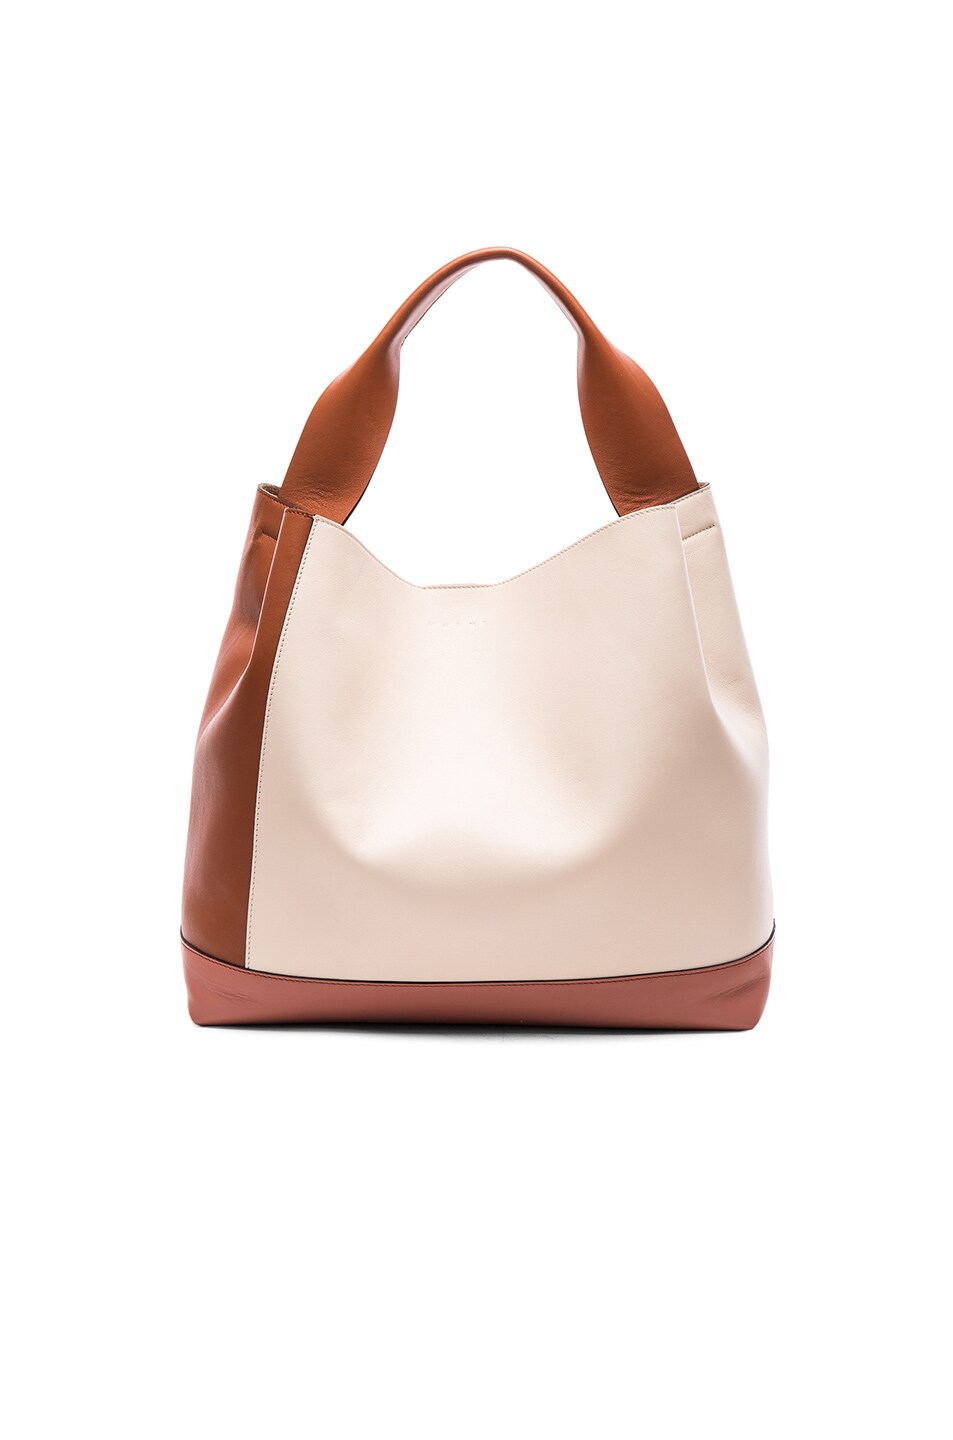 Image 1 of Marni Leather Shoulder Bag in Apricot, Glass & Rock